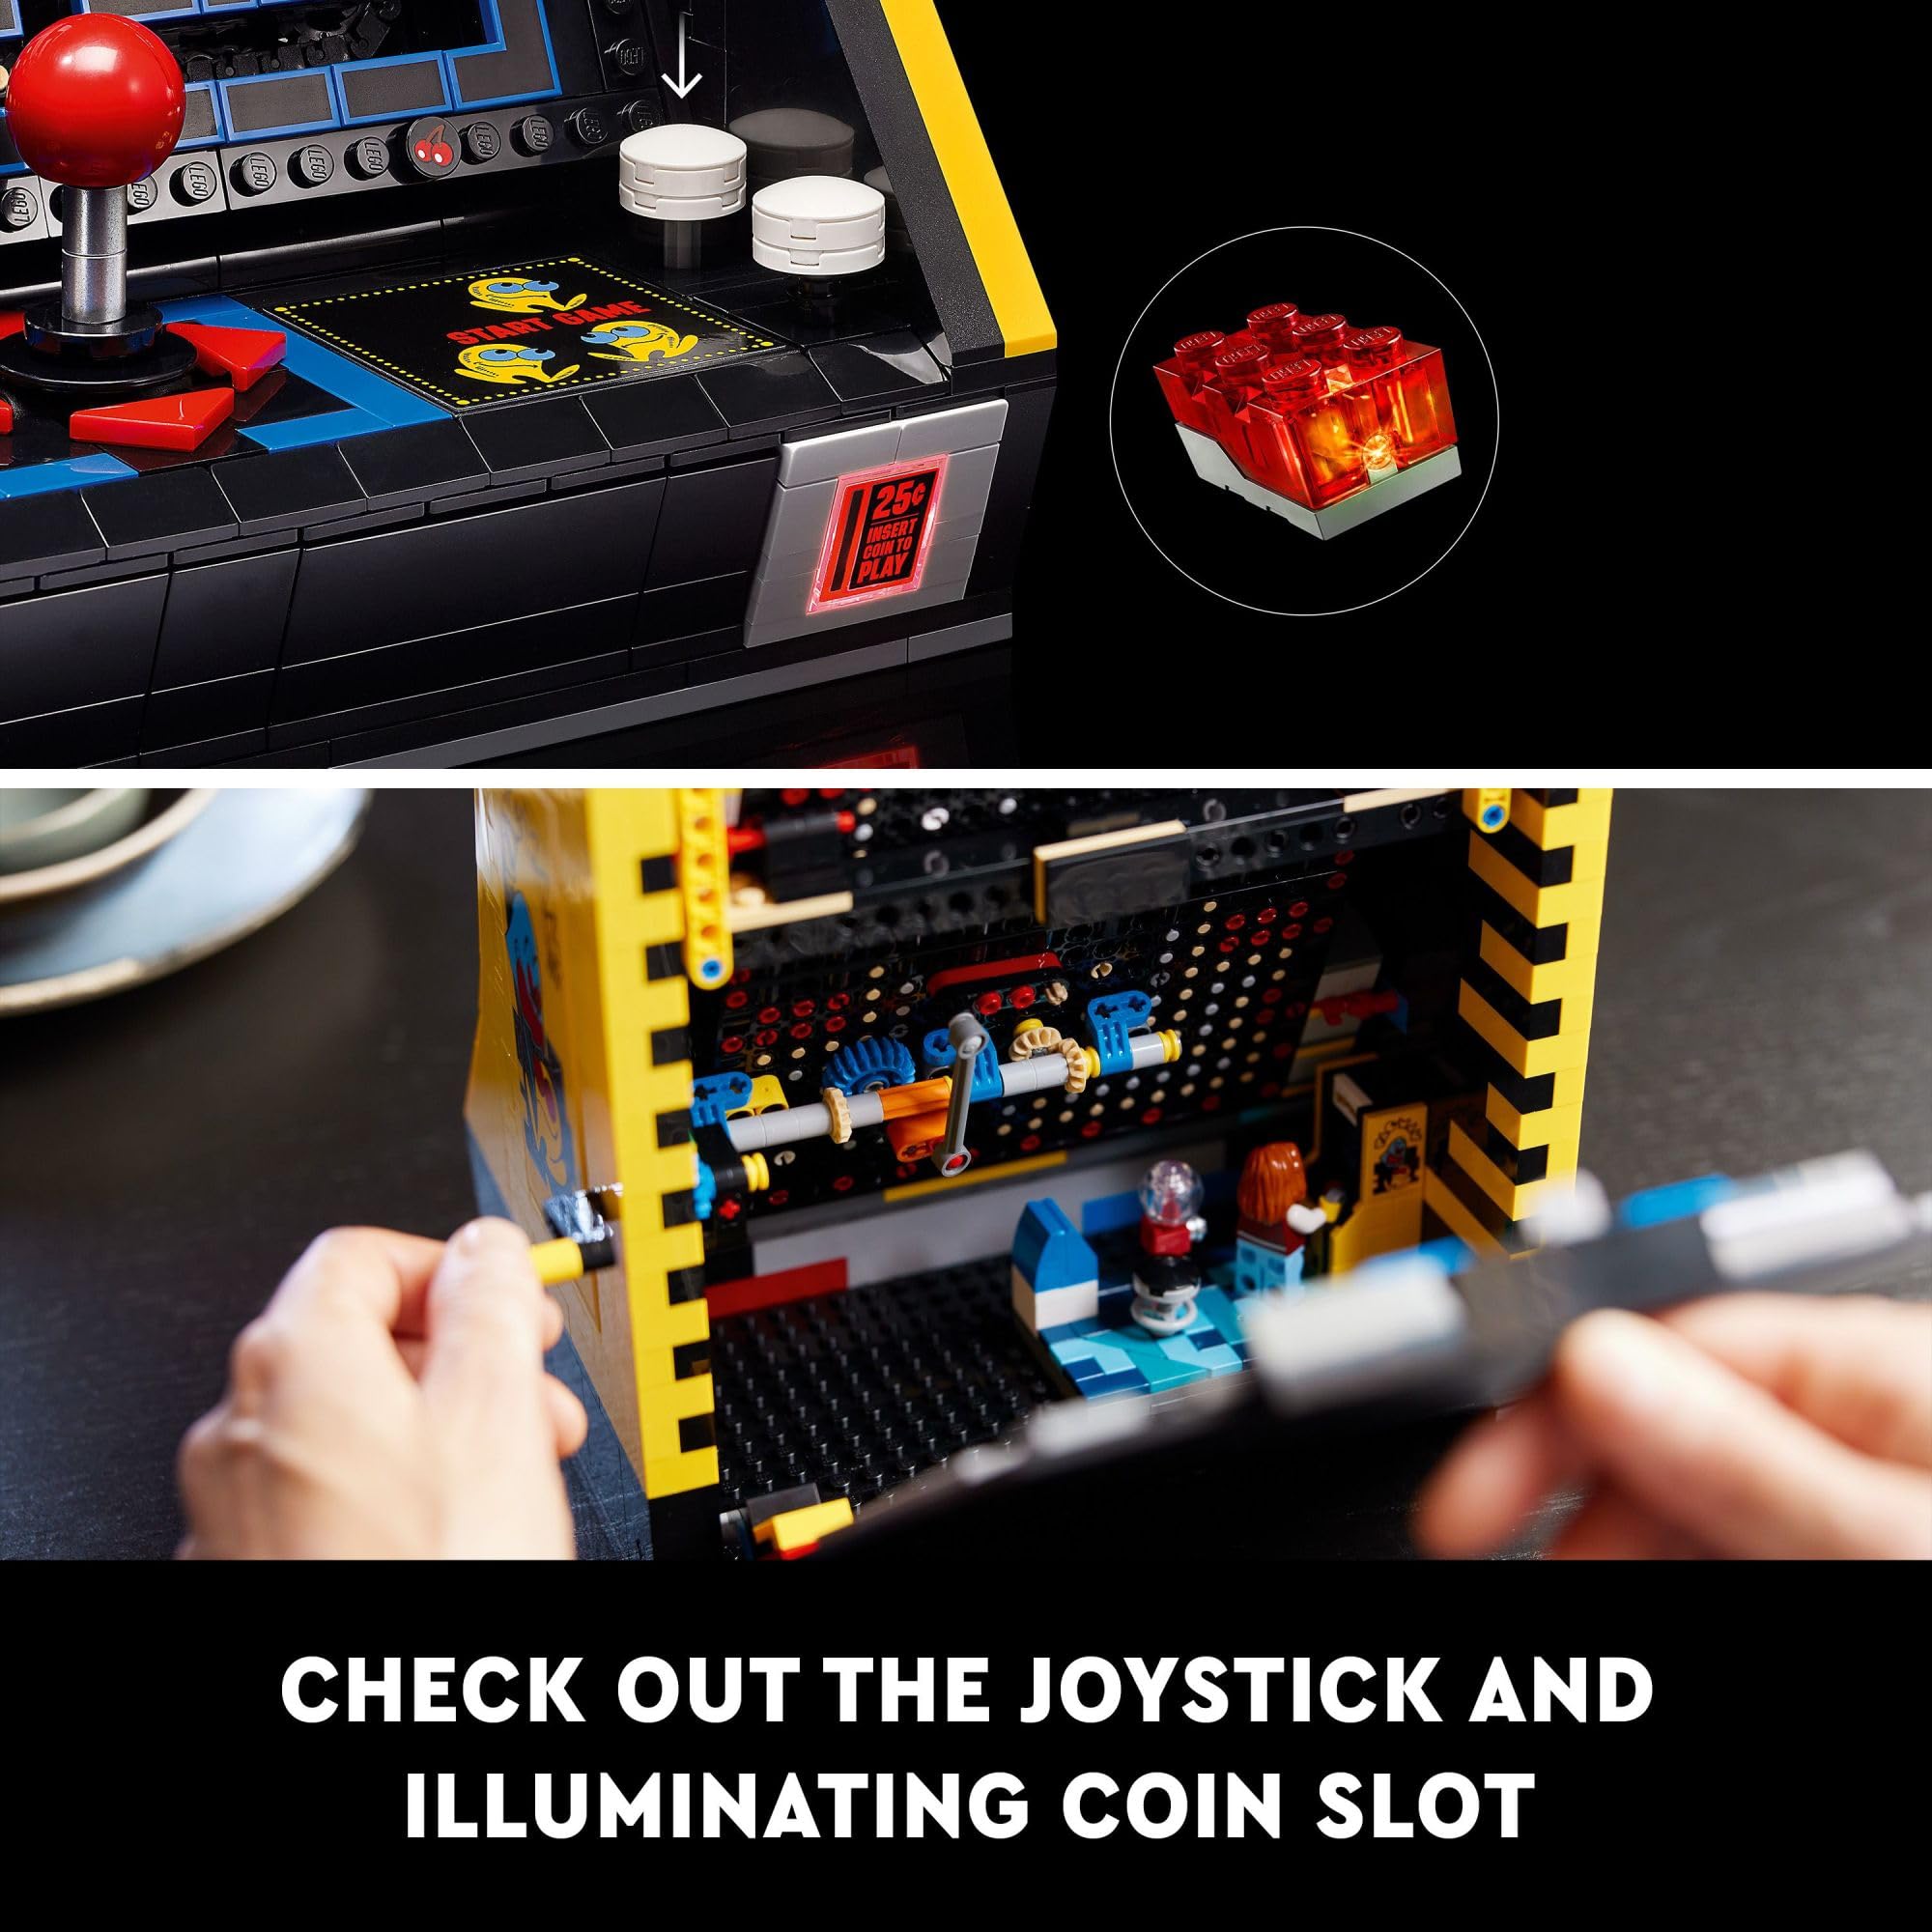 LEGO Icons PAC-Man Arcade Building Kit, Build a Replica Model of a Classic Video Game, Nostalgic Gift Idea for Fans of Retro Video Games and Retro Décor, Includes PAC-Man, Blinky and Clyde, 10323